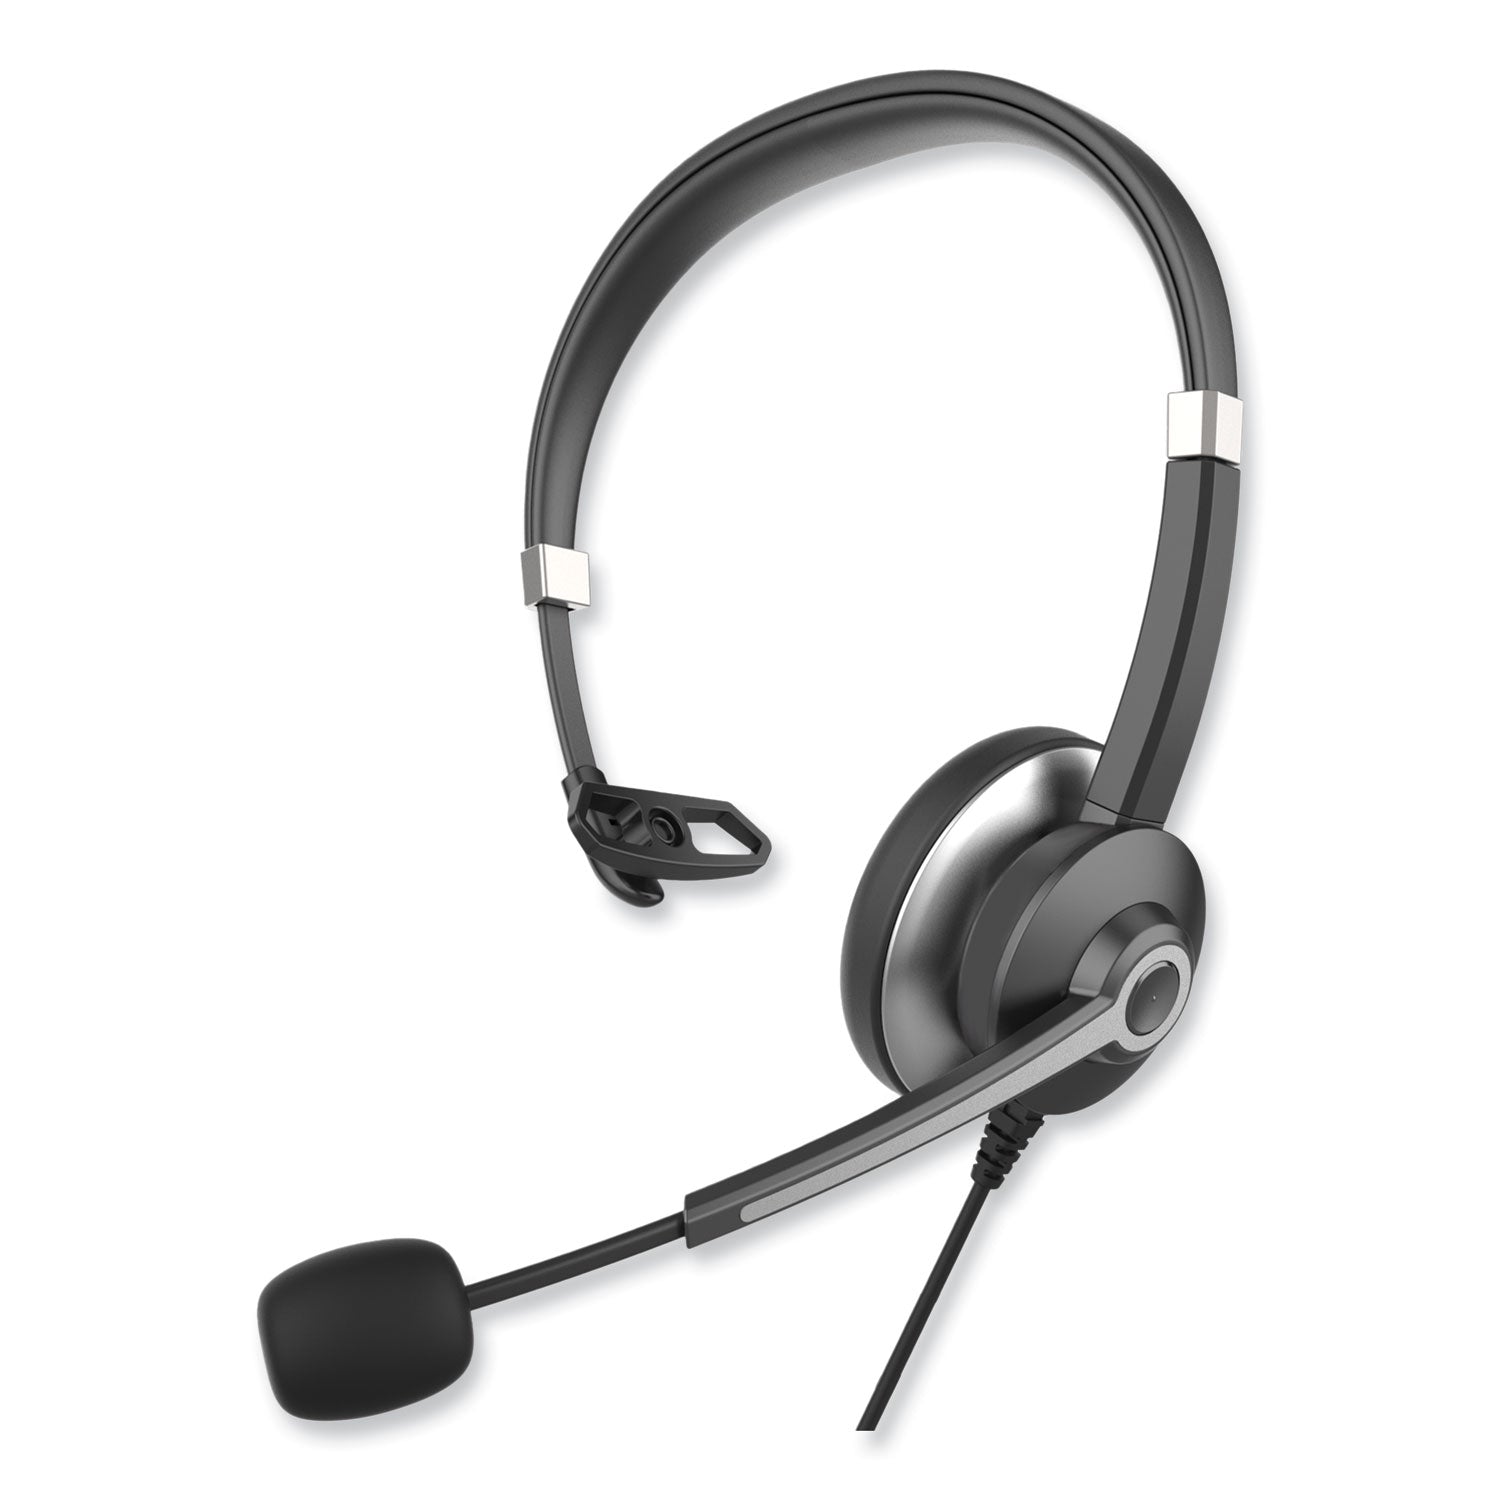 ivr70001-monaural-over-the-head-headset-black-silver_ivr70001 - 2